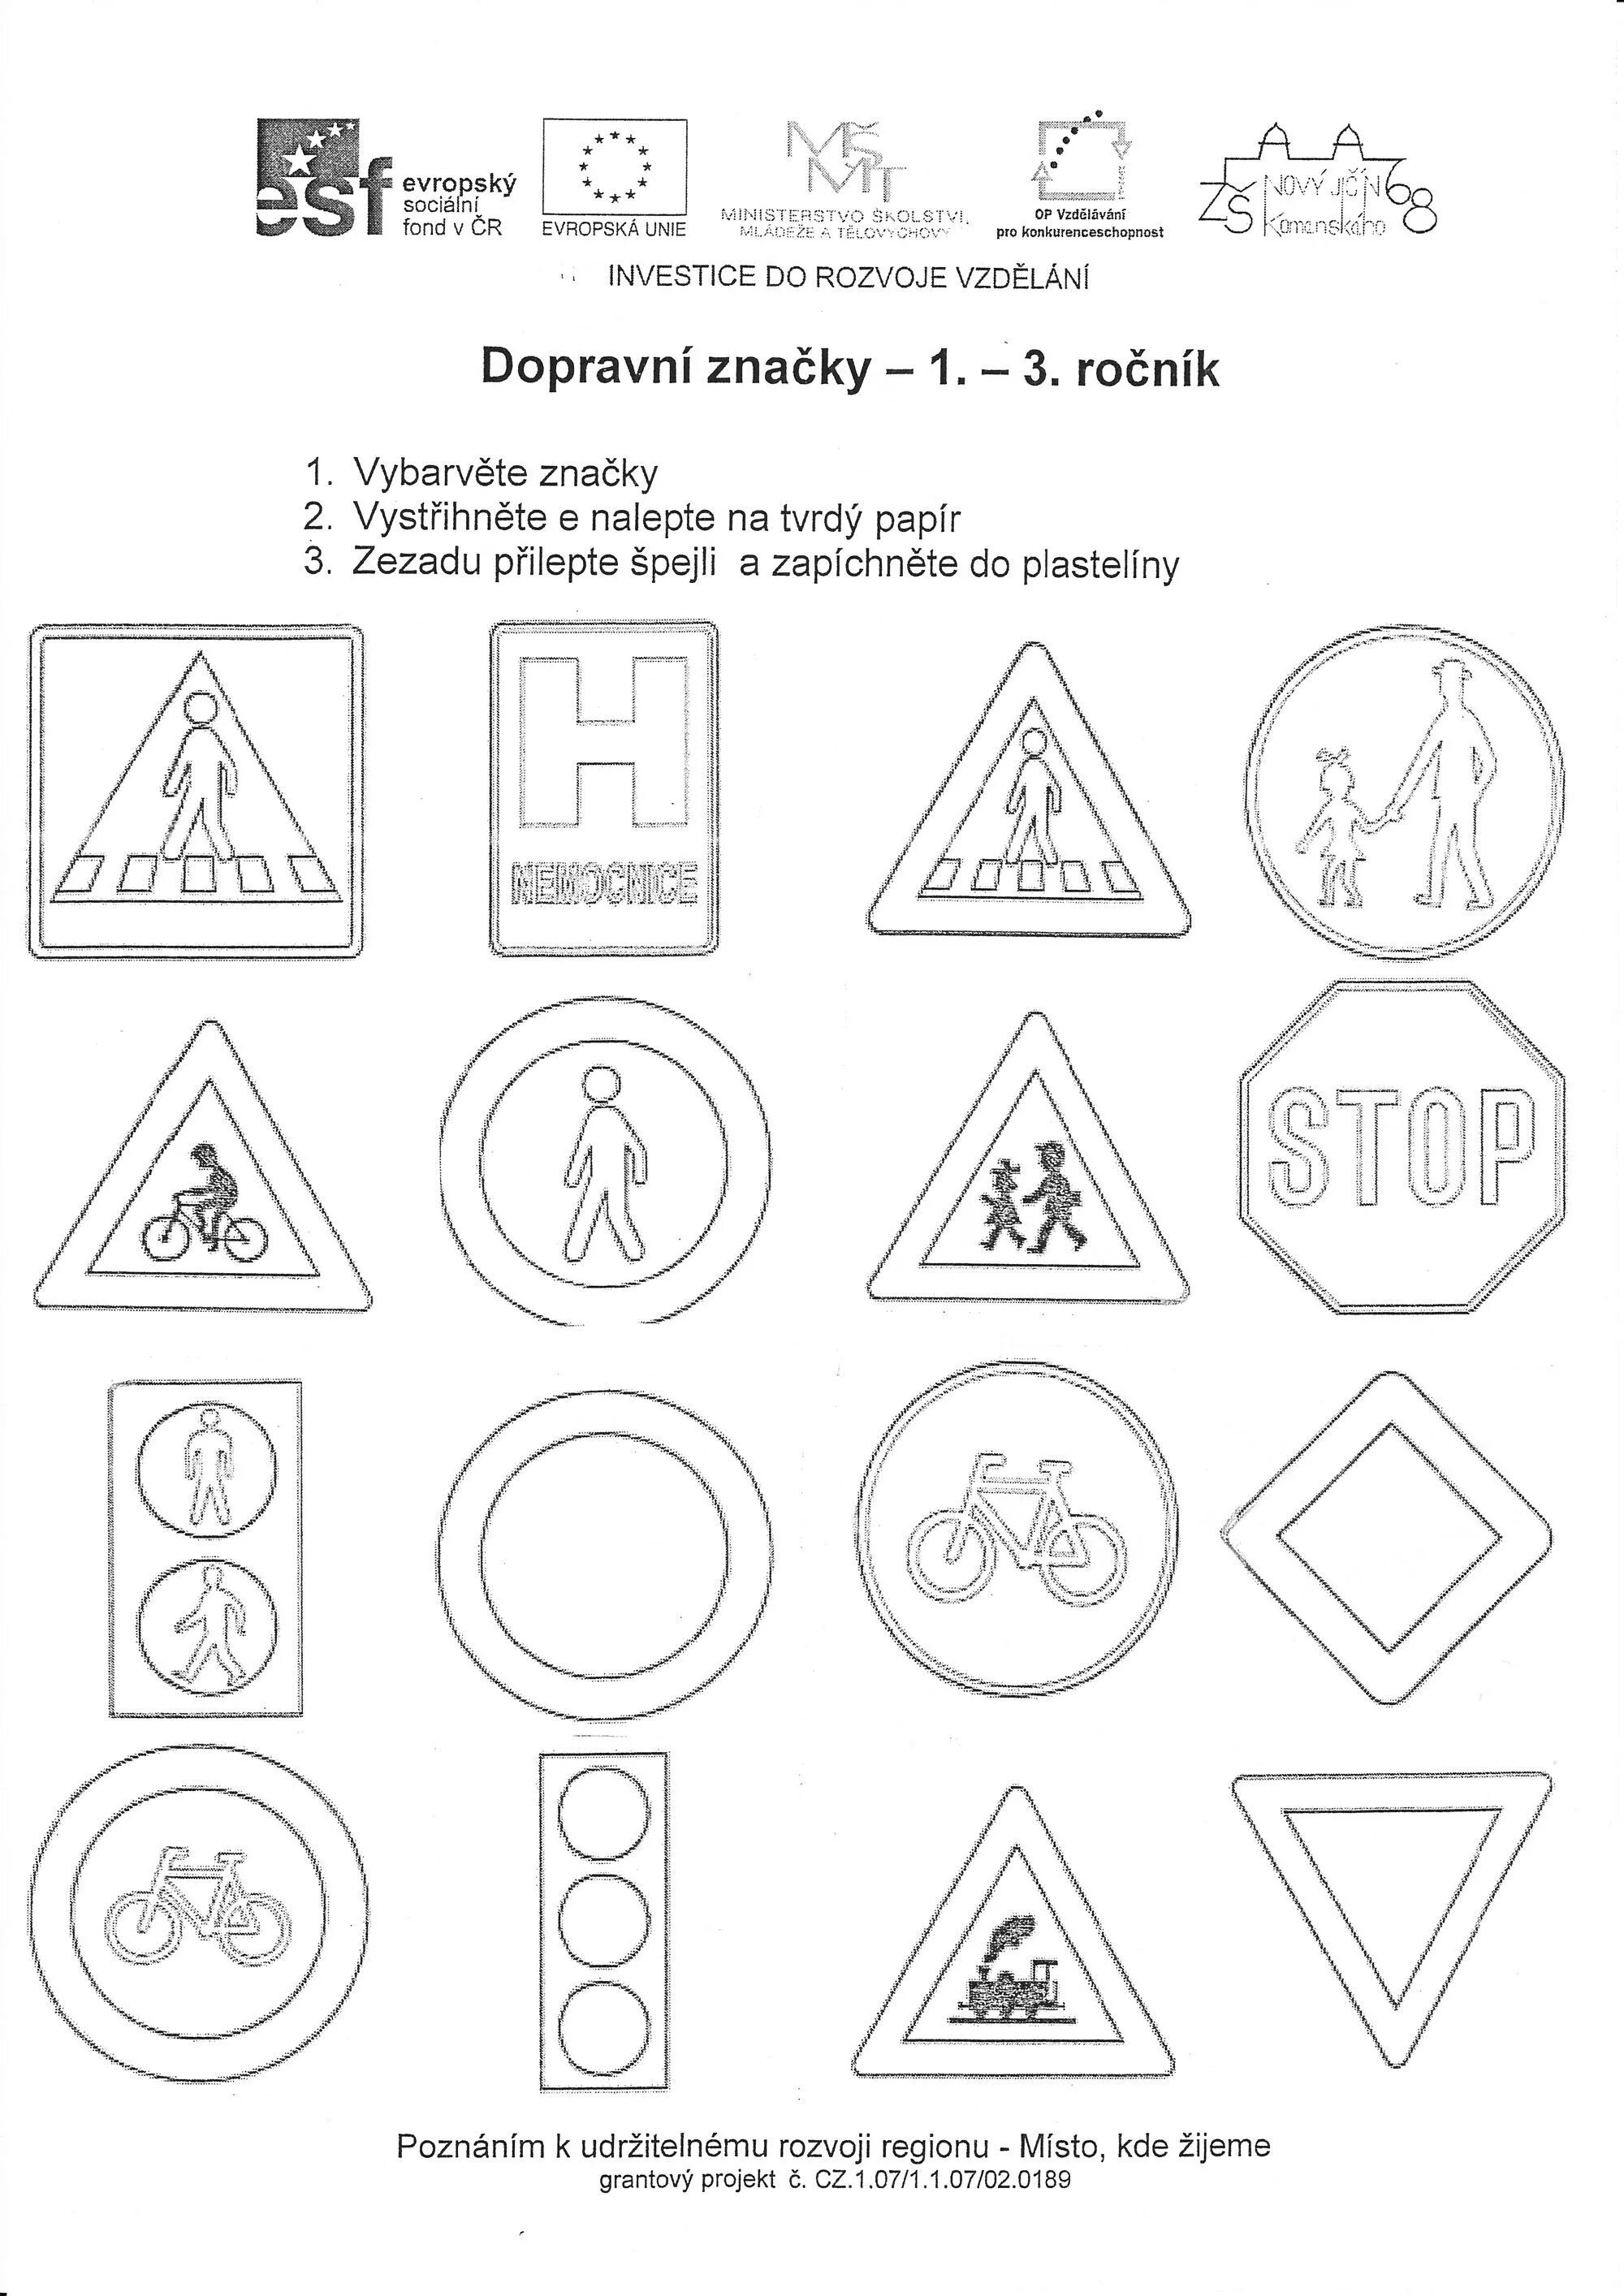 A fun road sign coloring book for kids with names and pictures